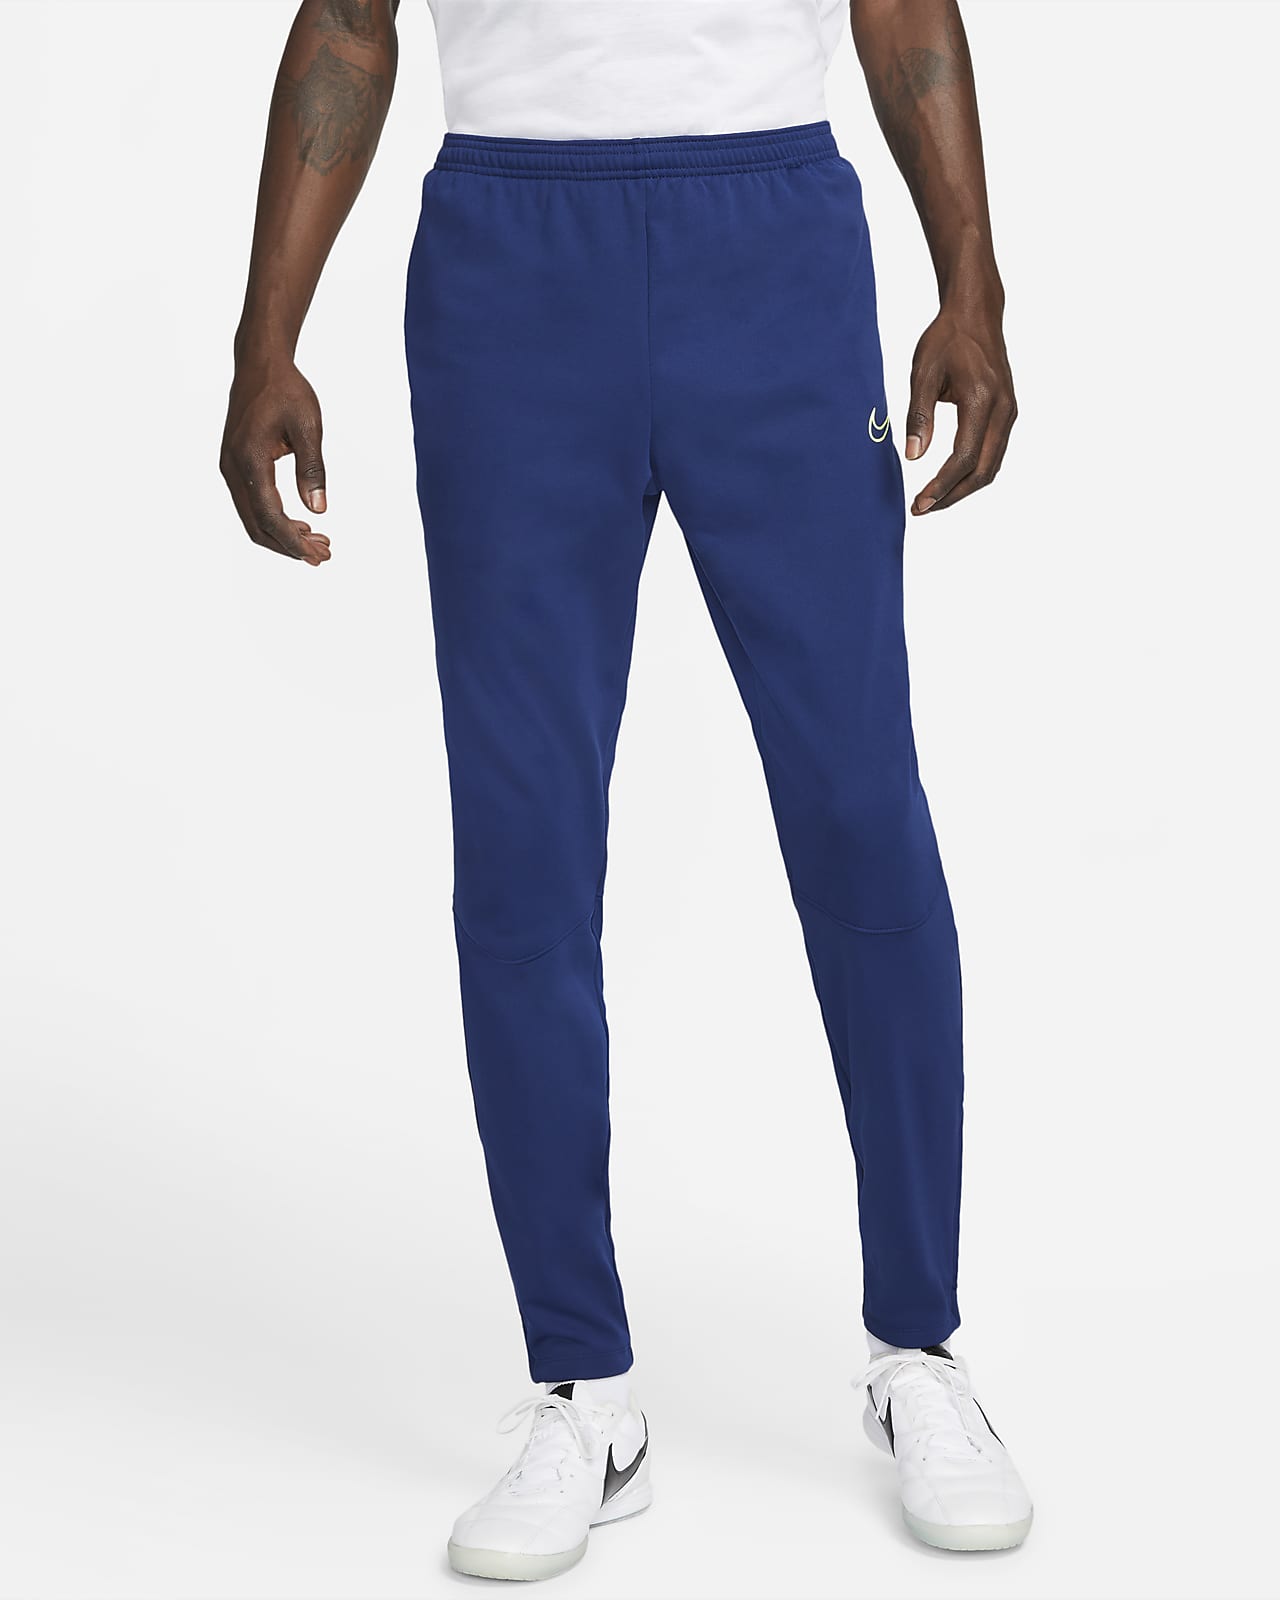 Nike Therma Fit Academy Winter Warrior Men's Knit Soccer Pants